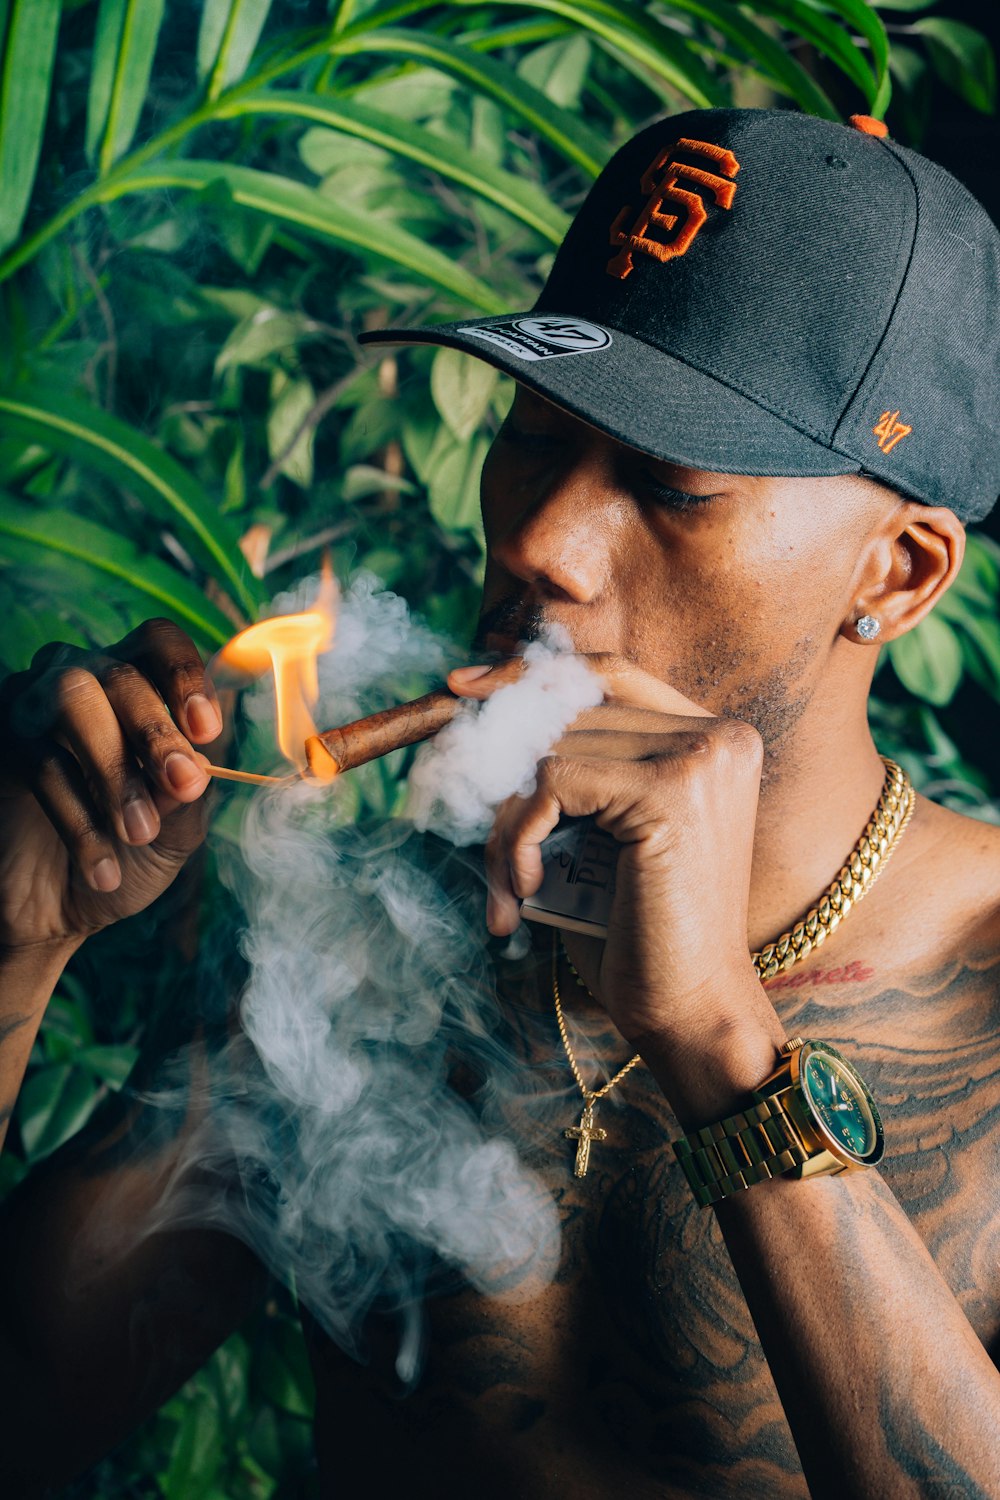 a man smoking a cigarette in front of a plant